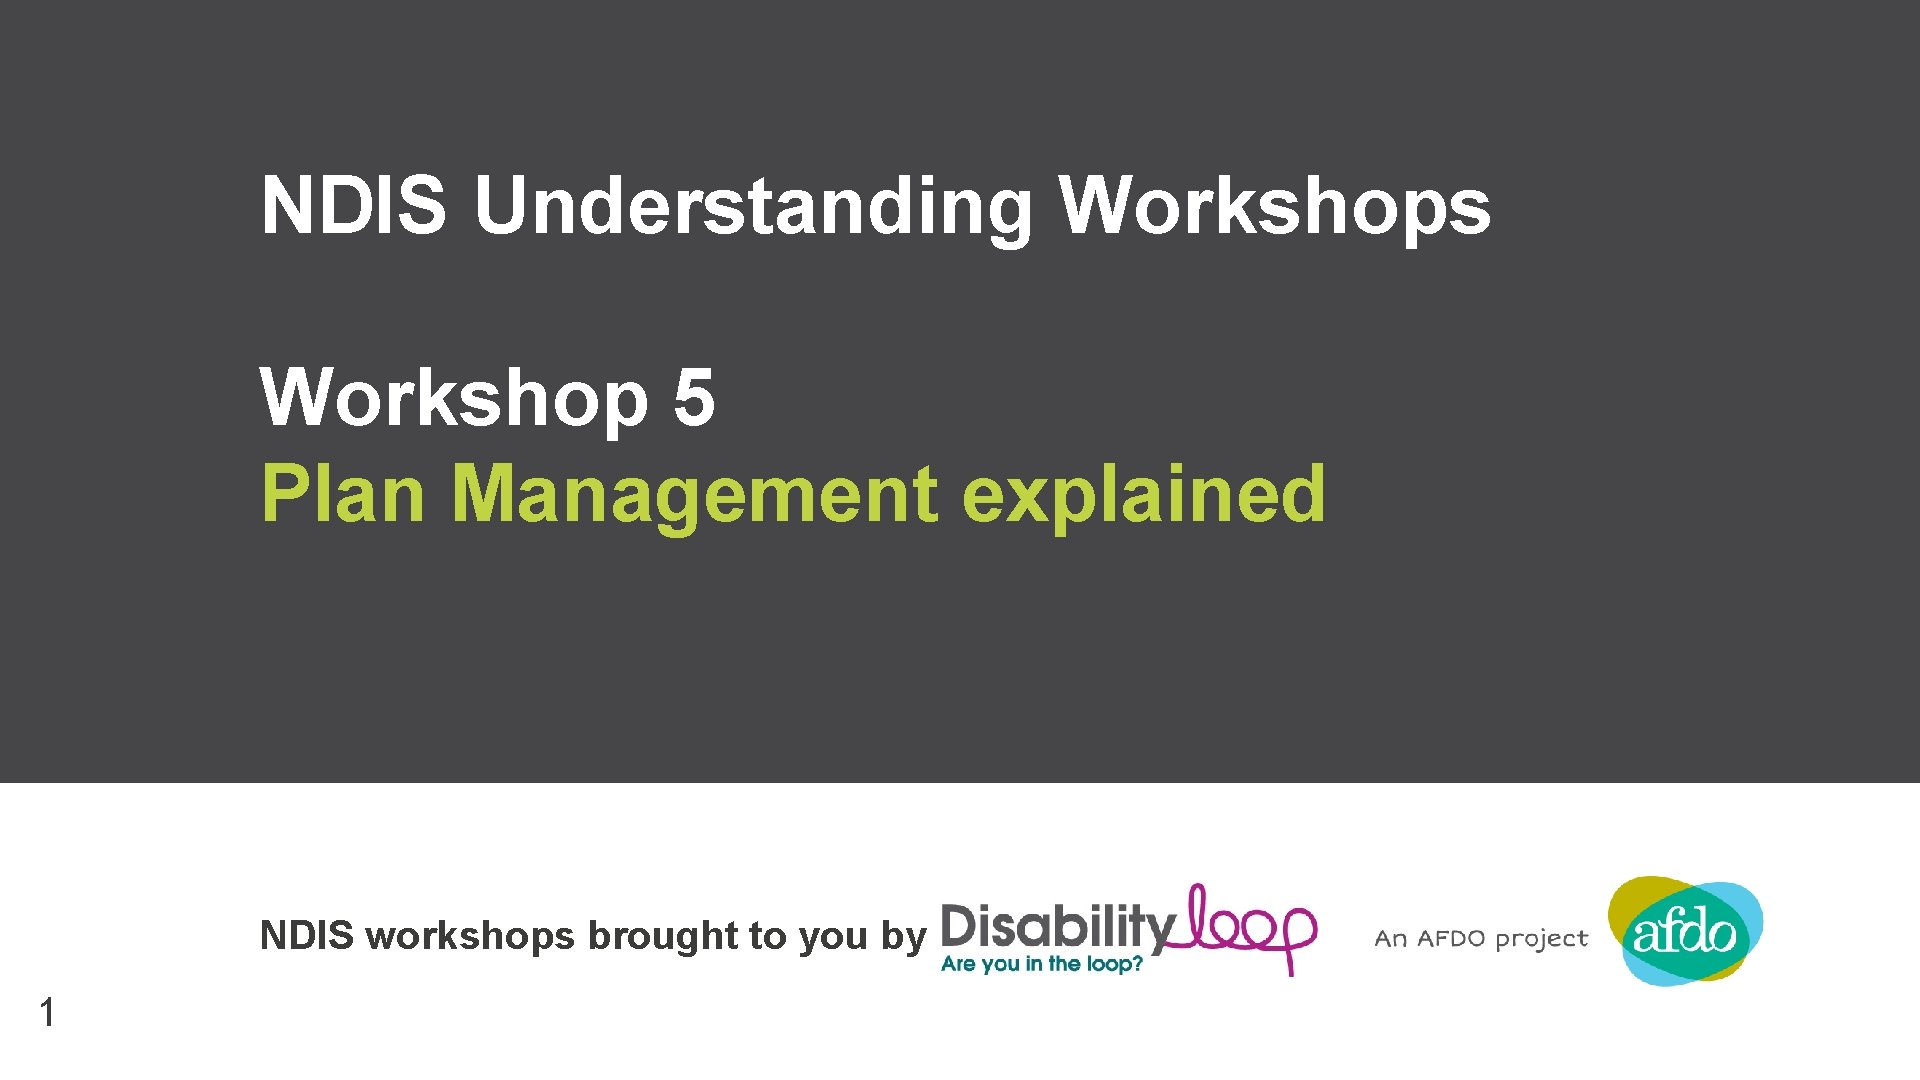 NDIS Understanding Workshops Workshop 5 Plan Management explained NDIS workshops brought to you by